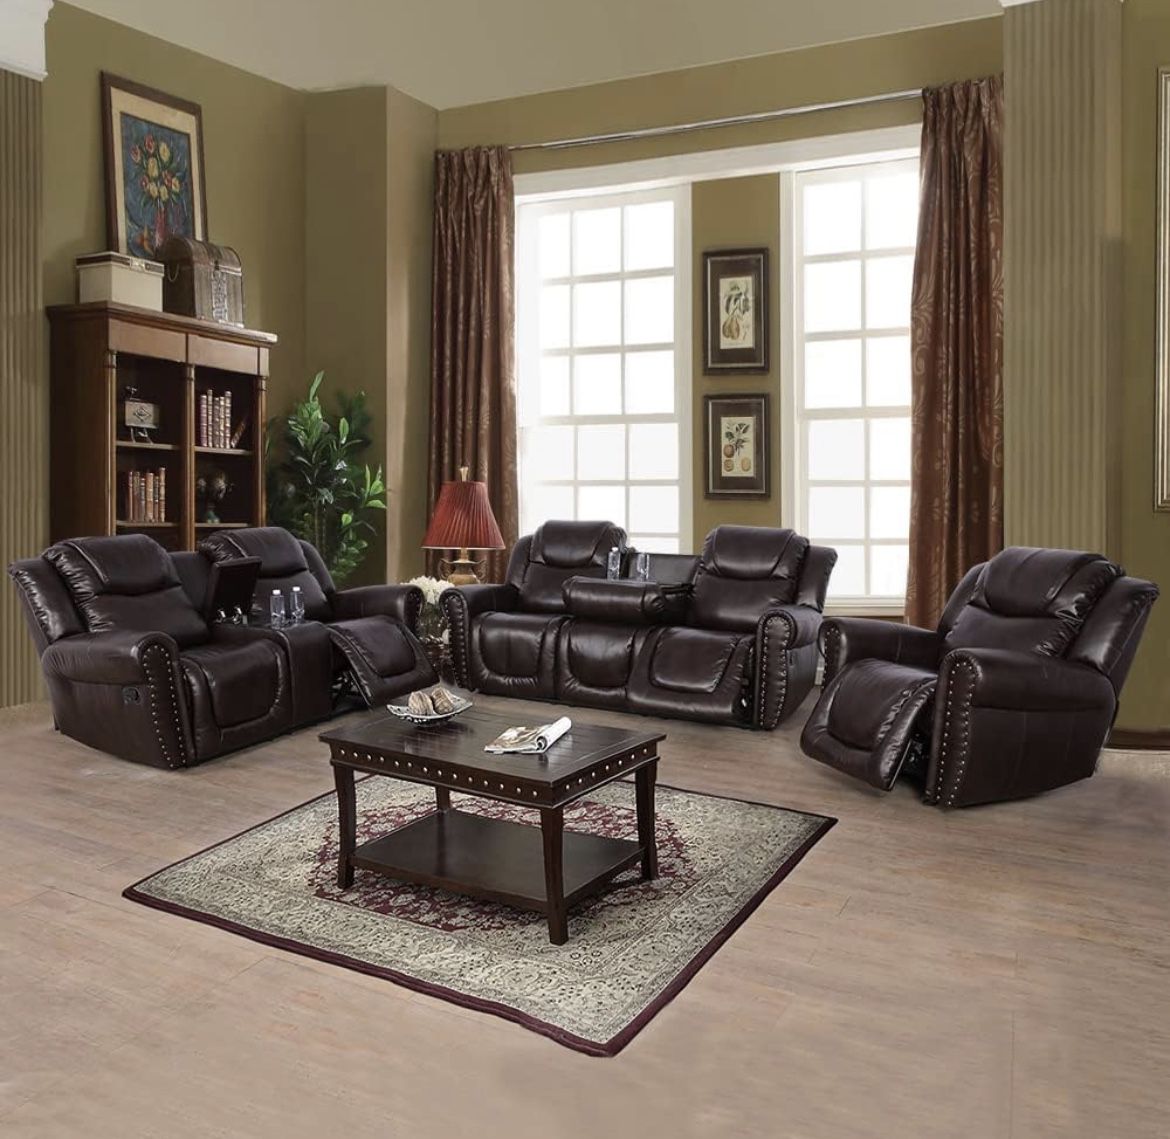 New Espresso Leather Recliner Set Include Sofa, Loveseat And Chair New In Packaging 